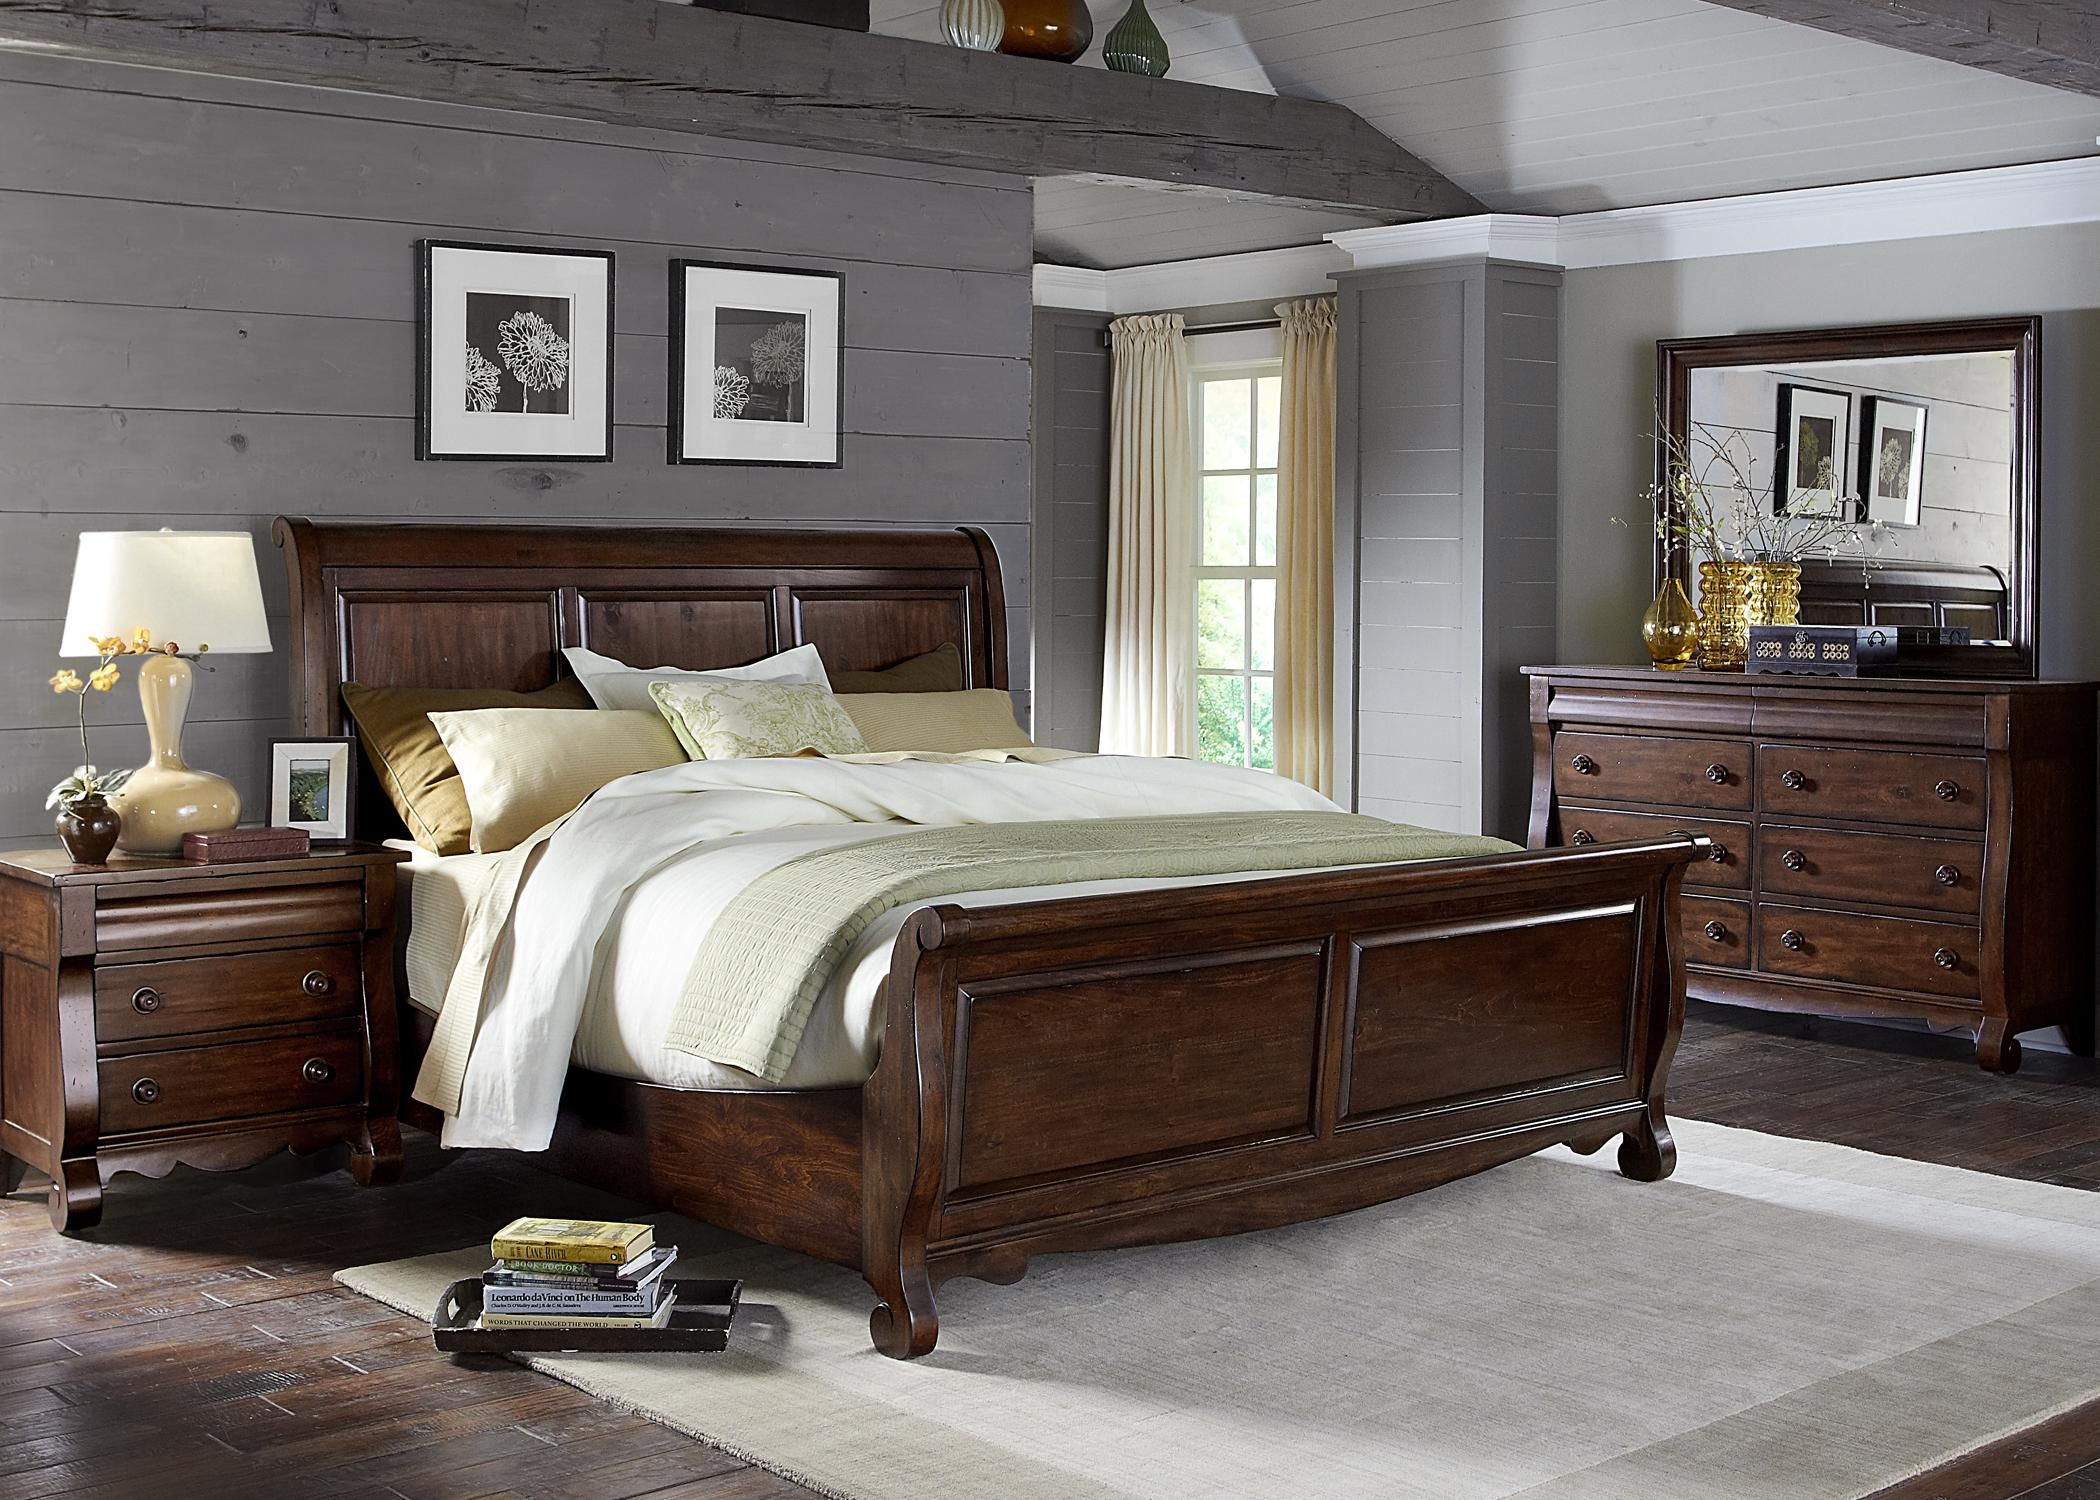 Sleigh Beds Traditional vs Modern Styles 16122